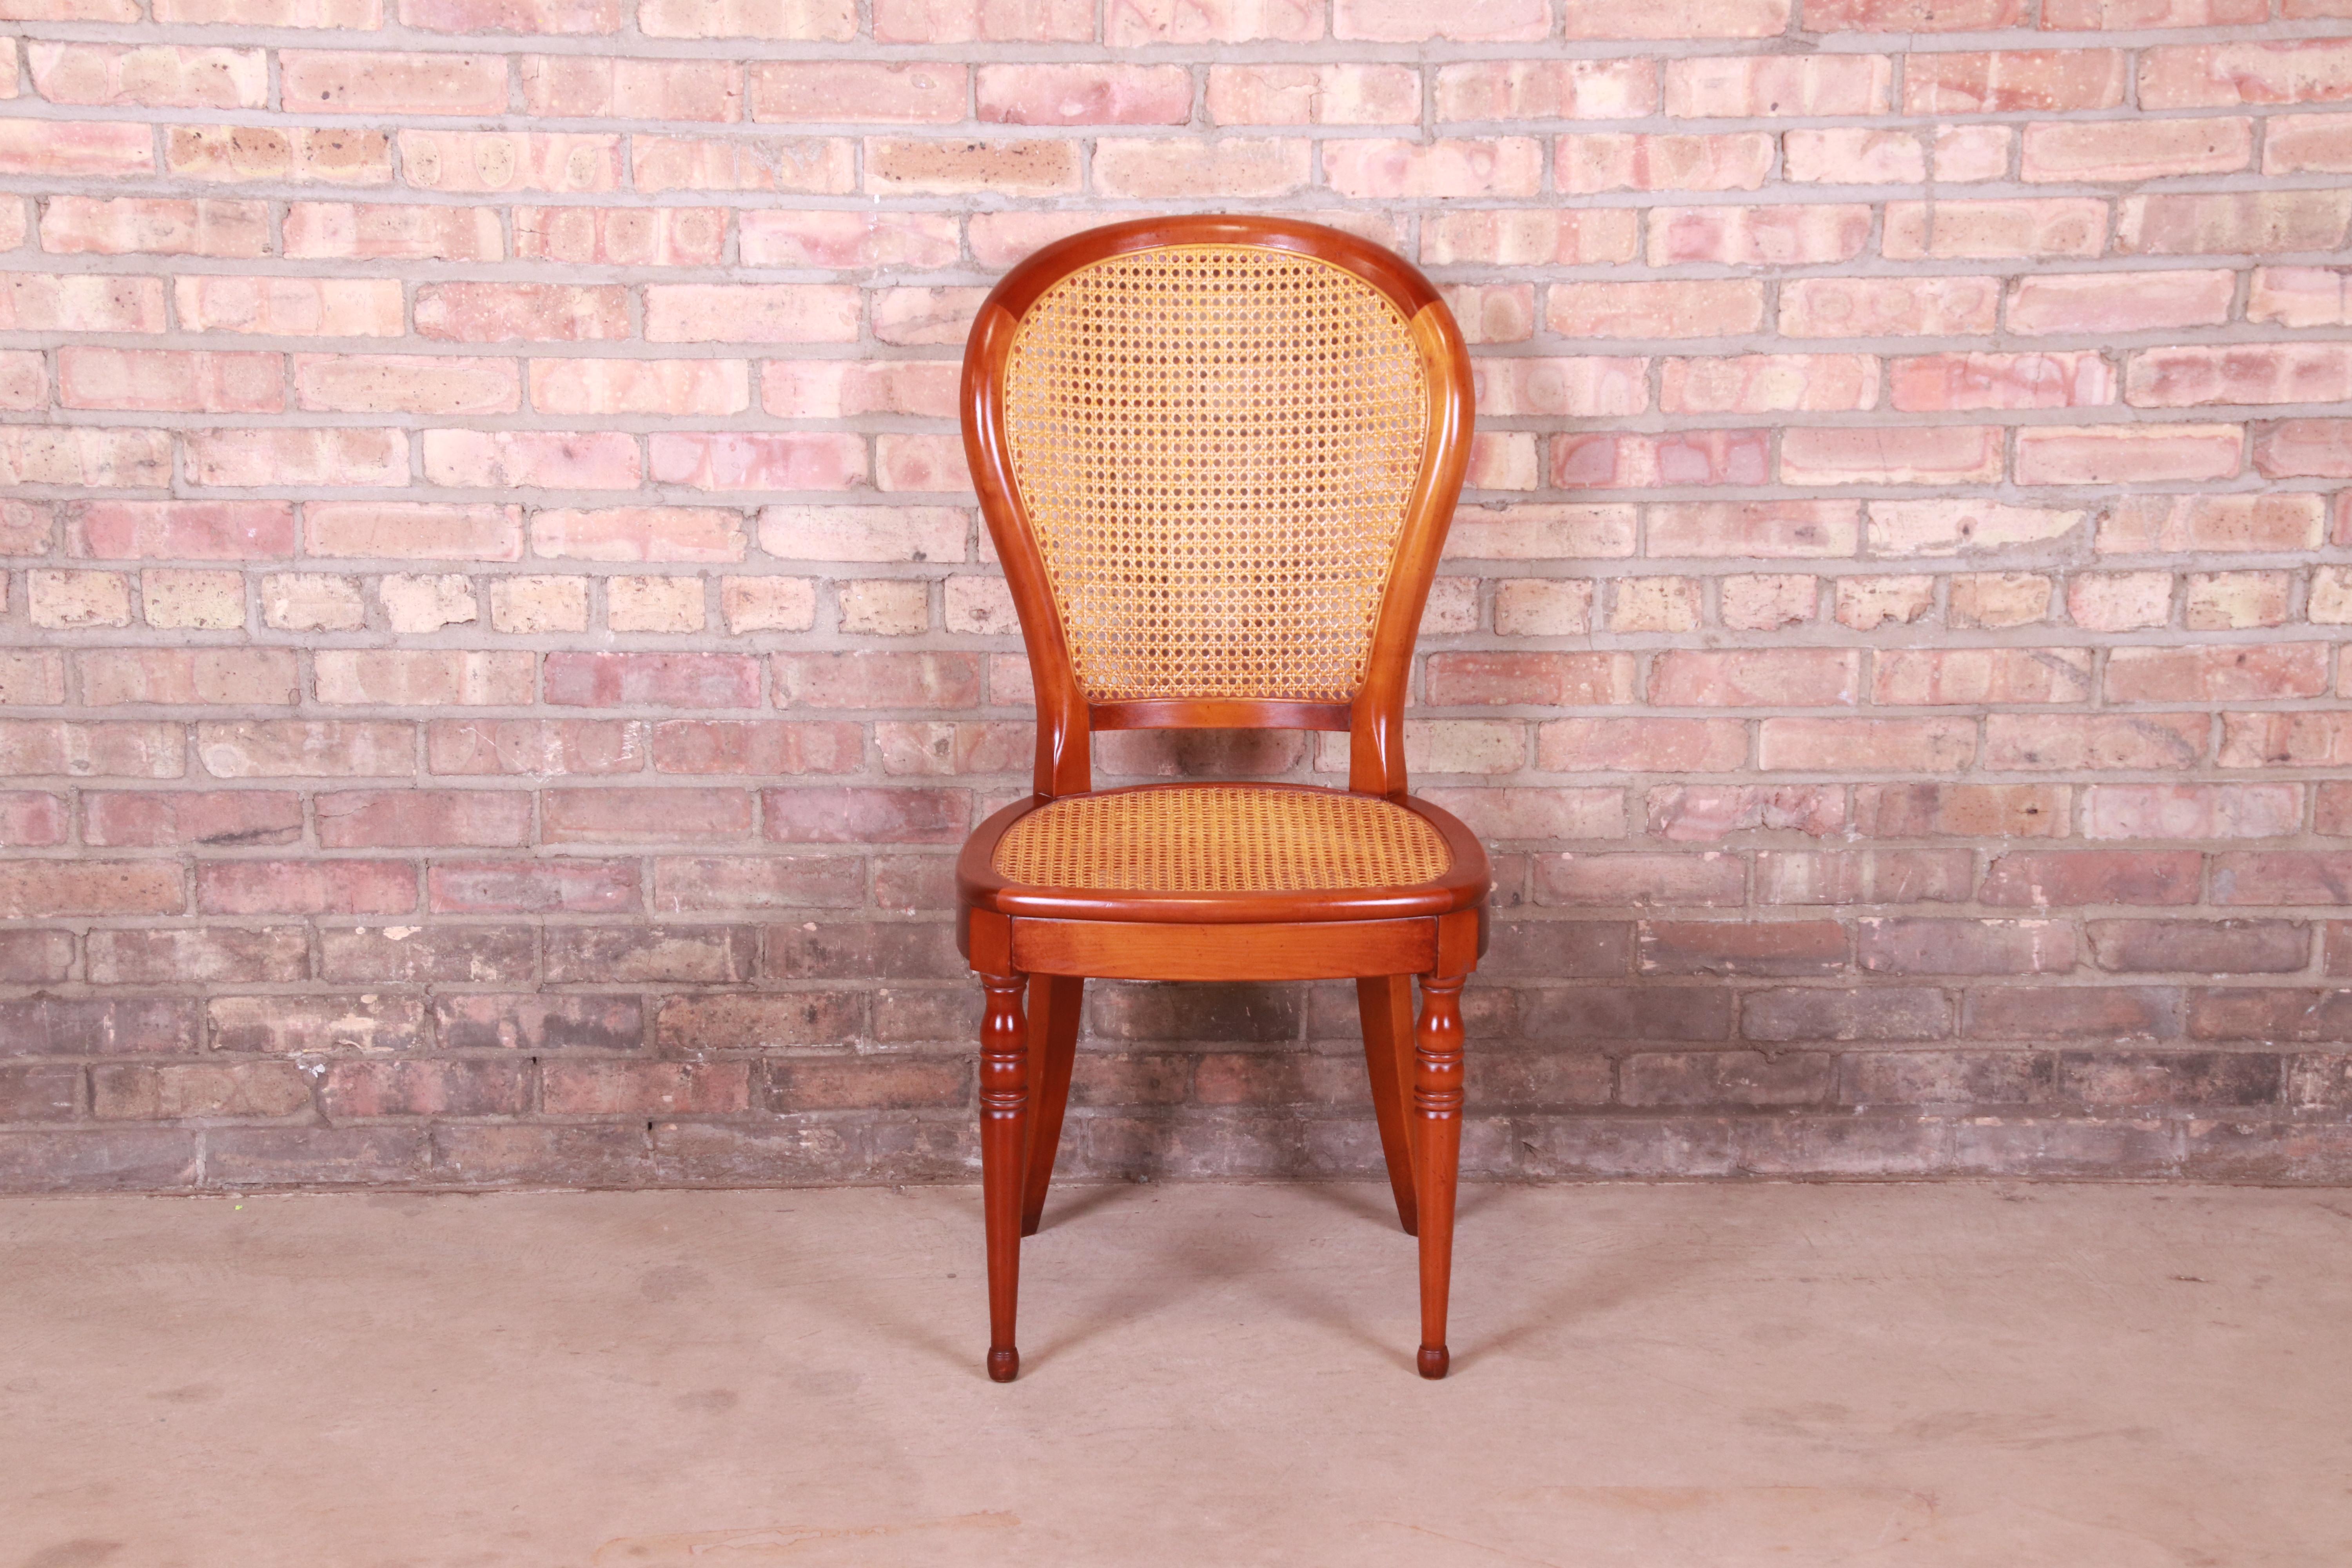 A gorgeous French balloon back side chair or desk chair

Attributed to Grange

France, late 20th century

Cherry wood, with turned legs and caned seat and back.

Measures: 18.5